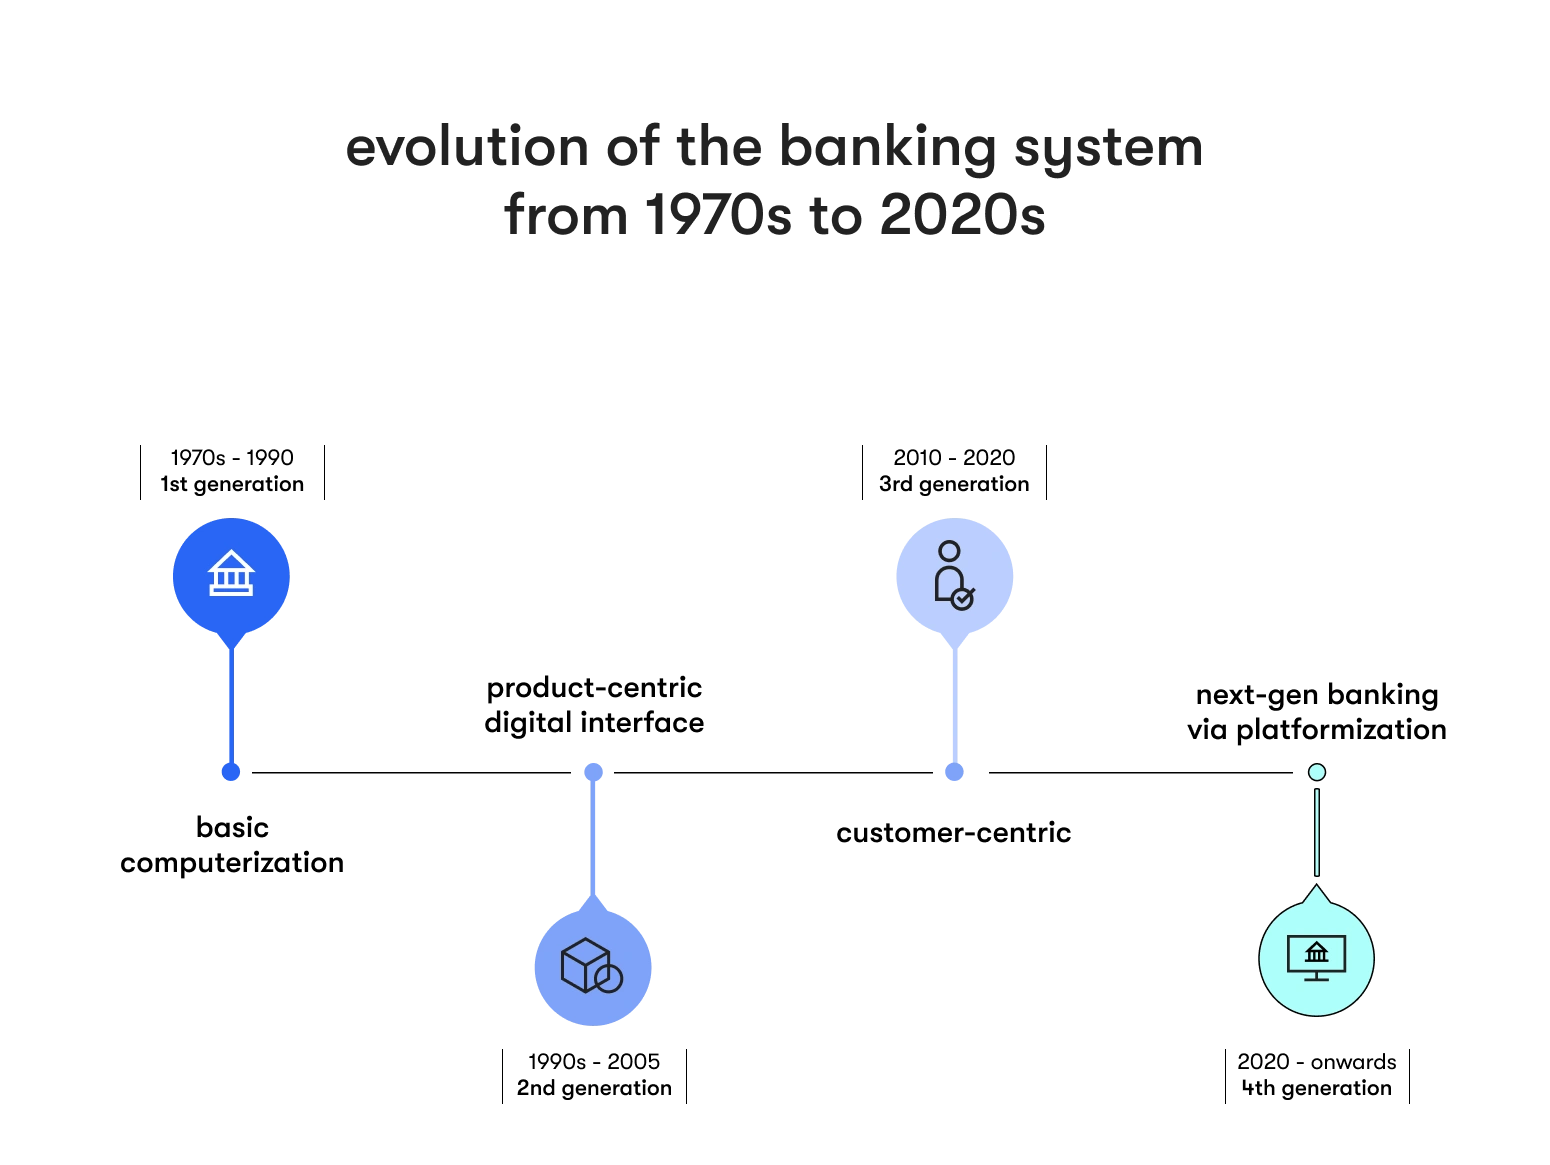 evolution of the banking system from 1970s to 2020s